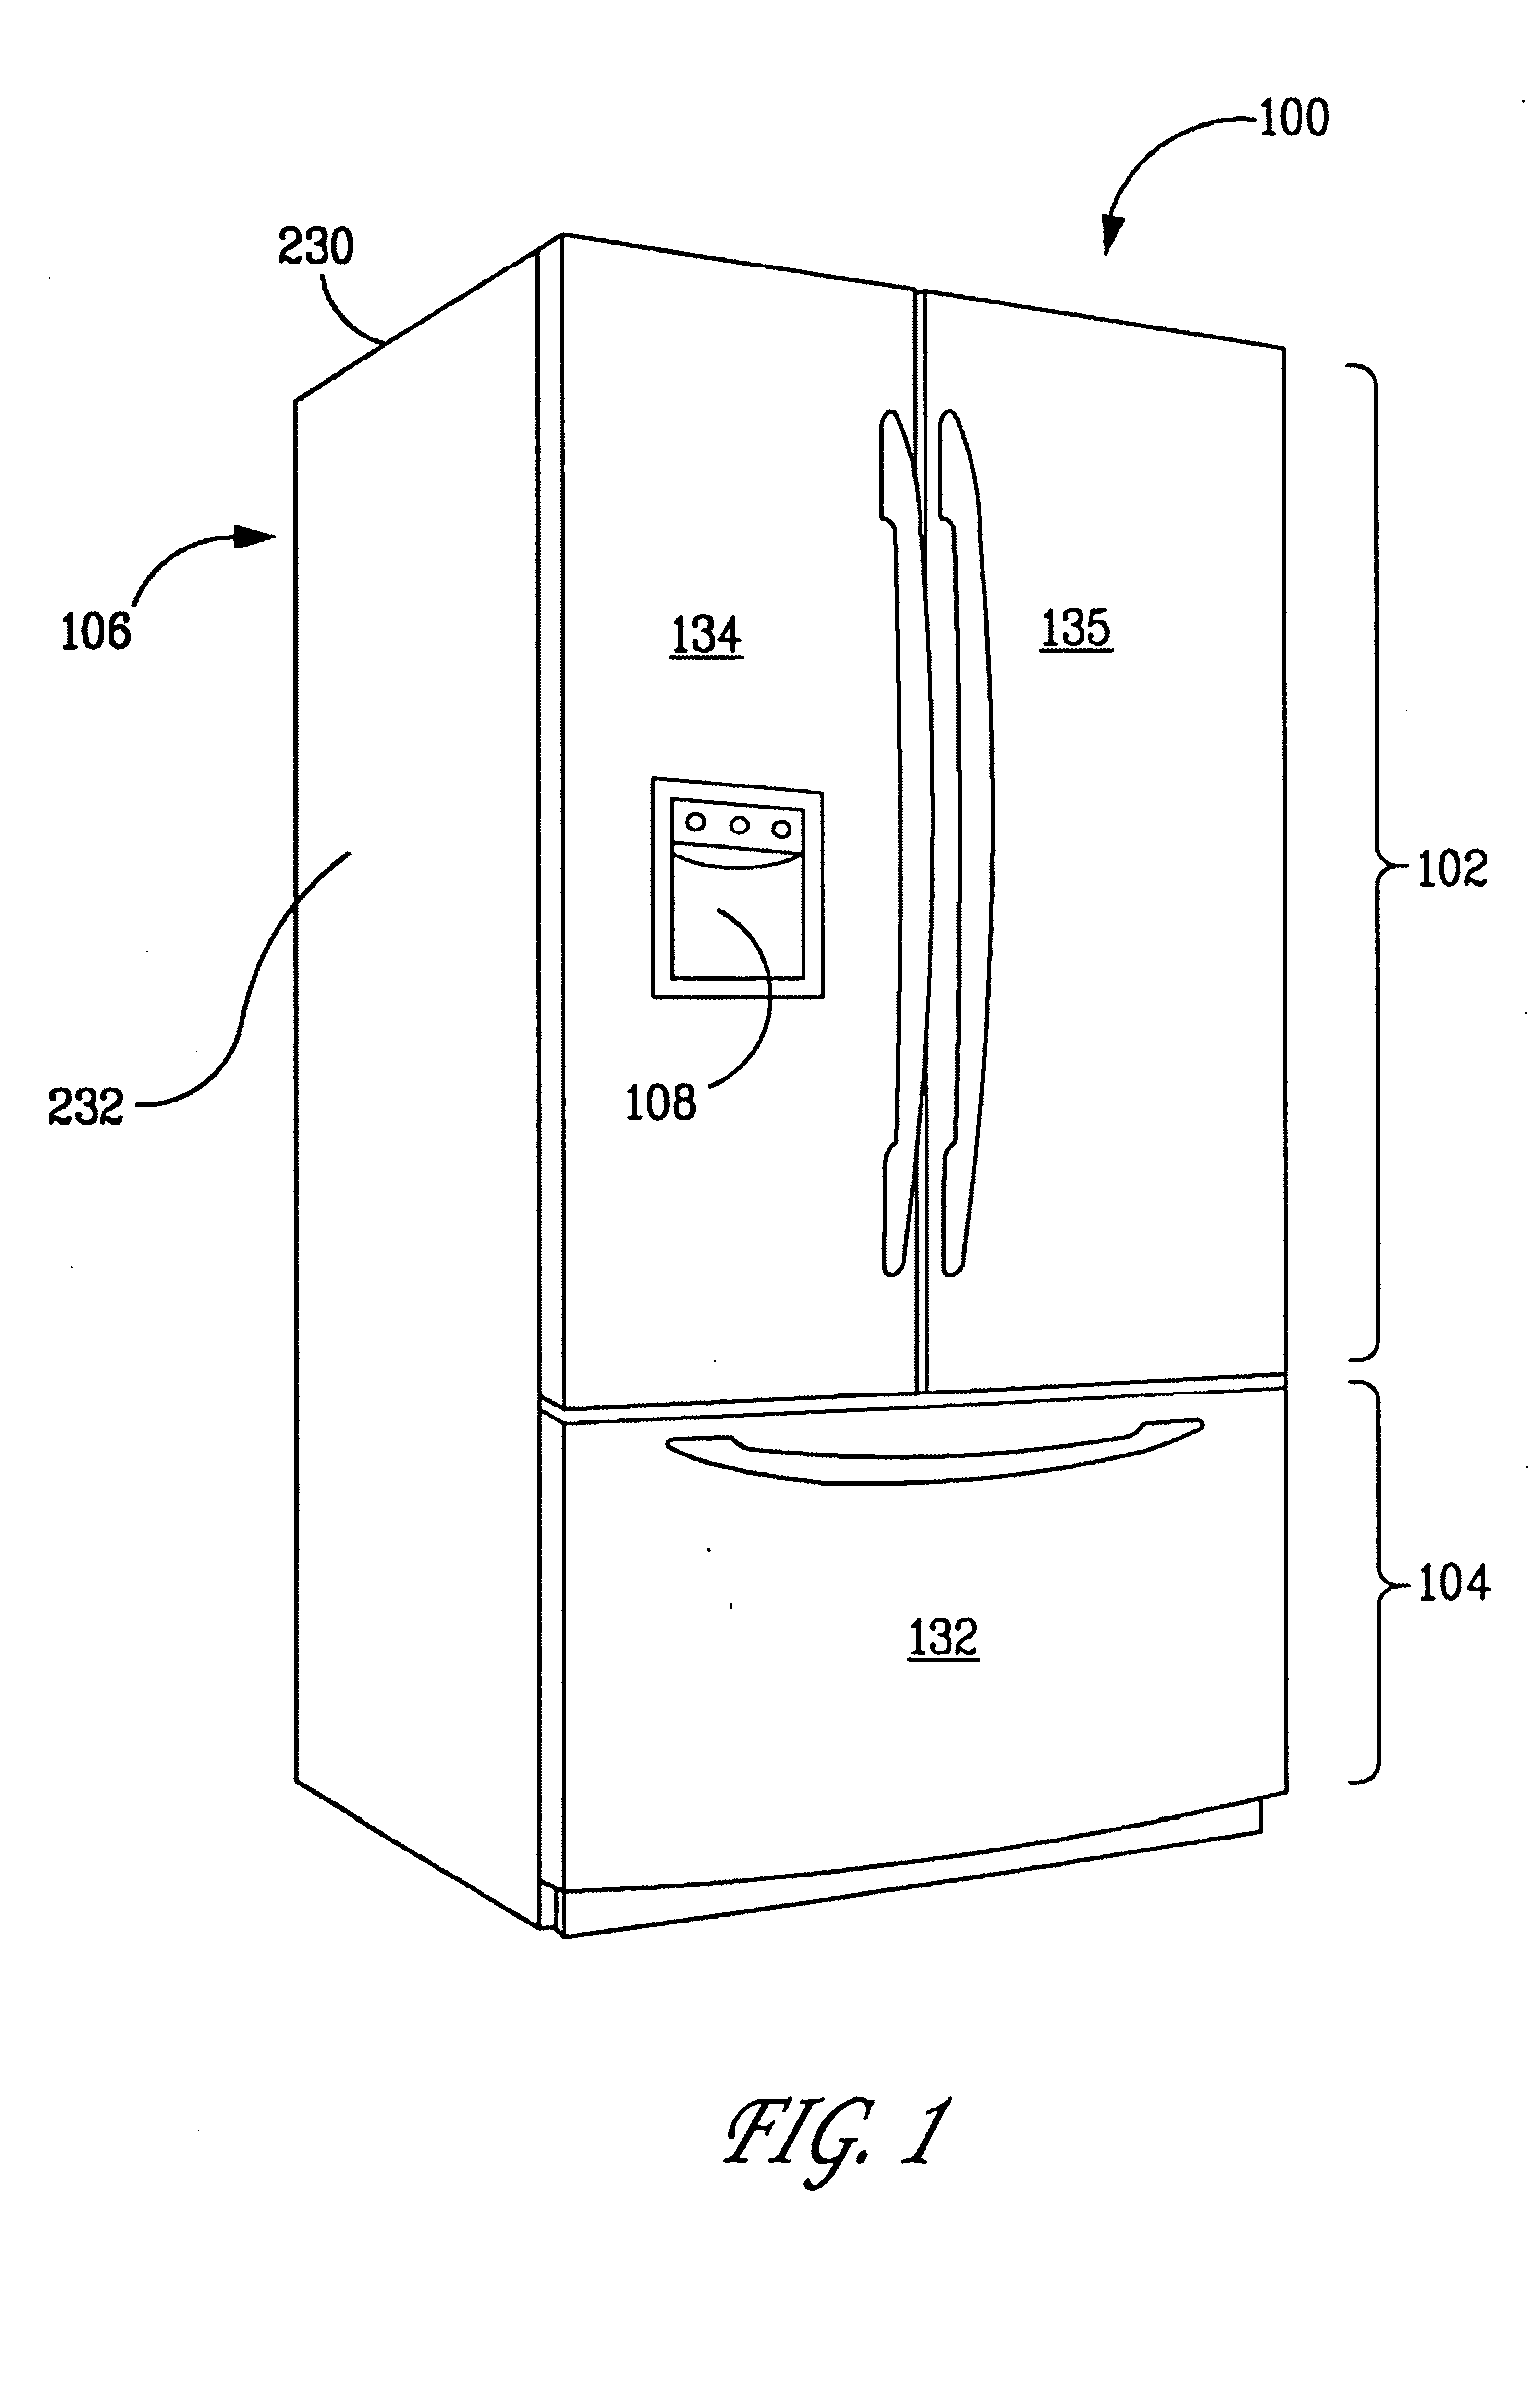 Ice in bucket detection for an icemaker